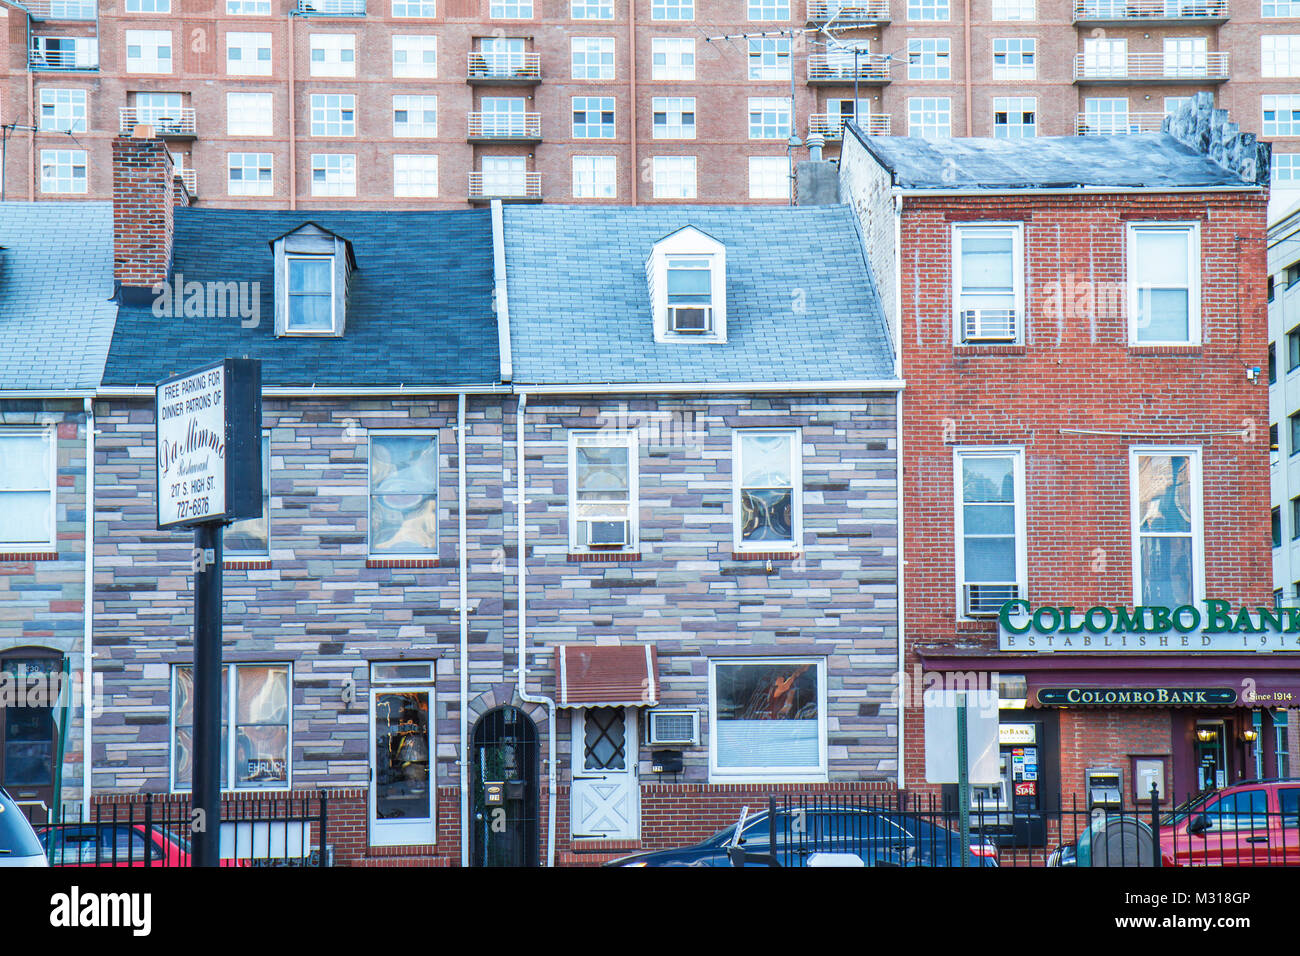 Baltimore Maryland,Little Italy neighborhood,row house,brick,Formstone,mixed use,Colombo Bank,banking,contrast,high rise skyscraper skyscrapers buildi Stock Photo